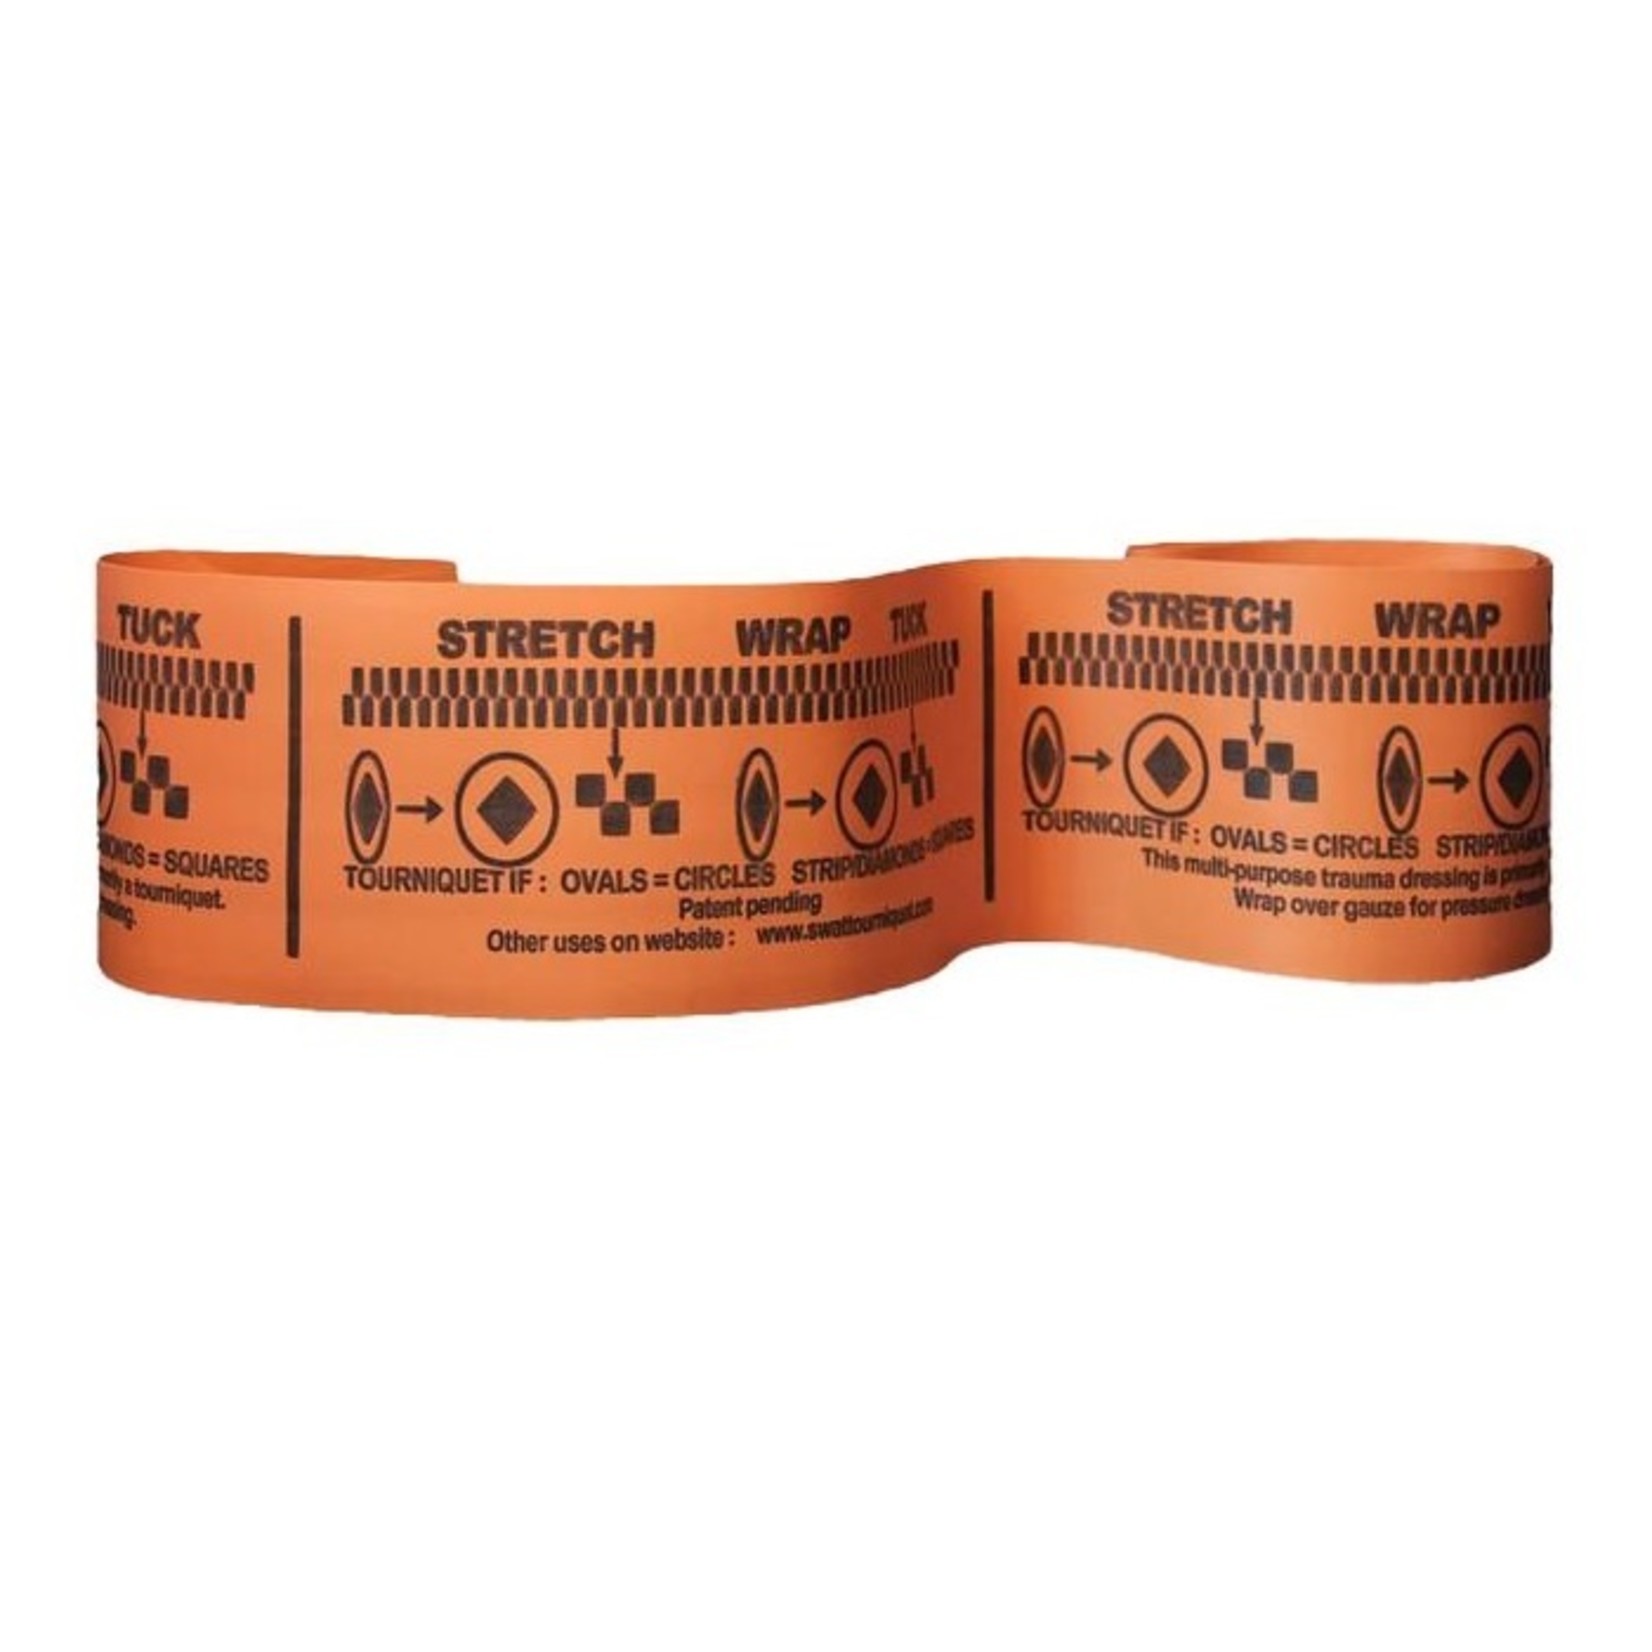 H&H Medical Corp SWAT-T Stretch Wrap and Tuck Tourniquet